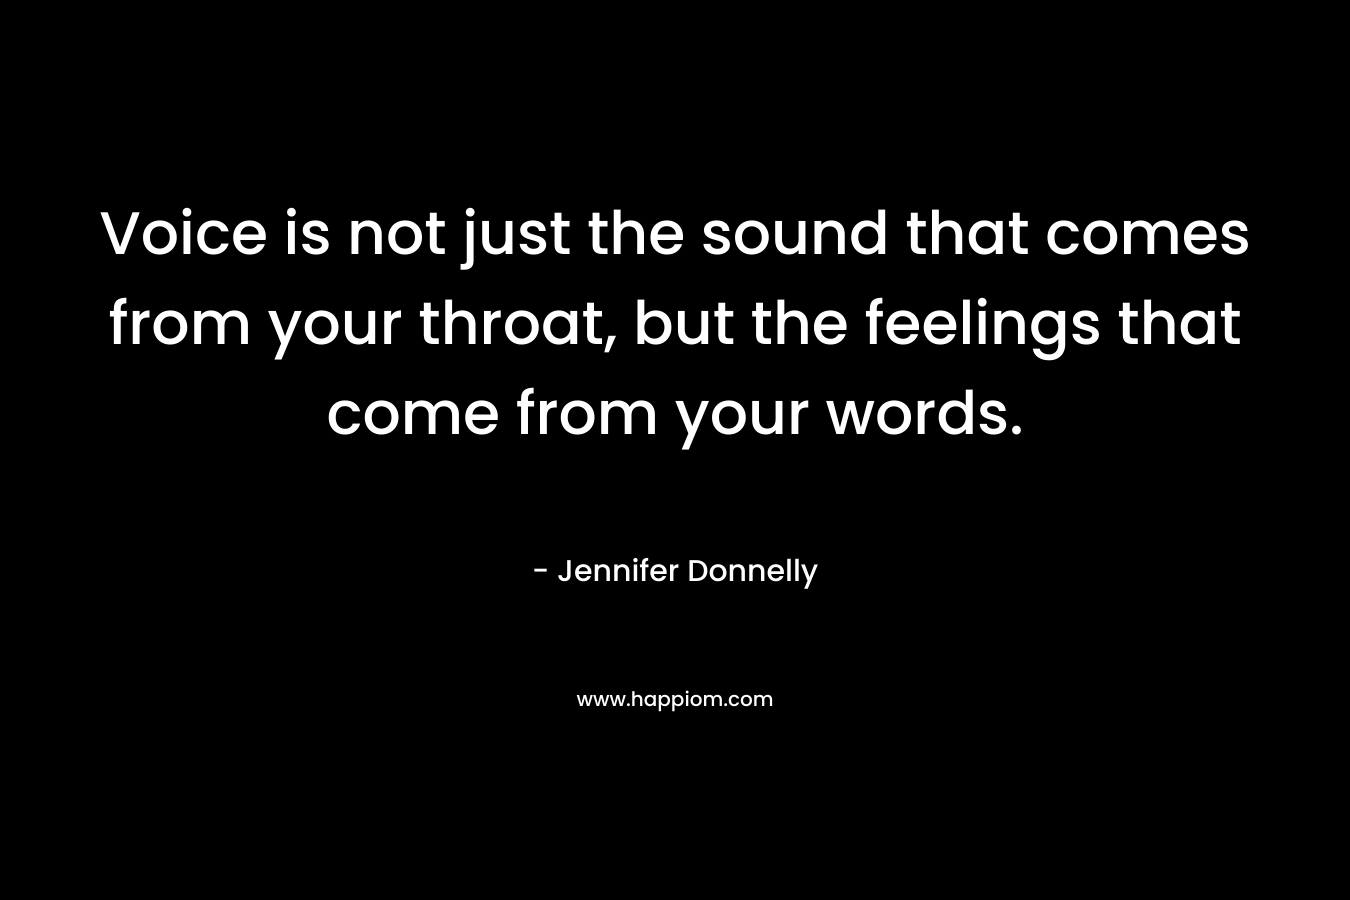 Voice is not just the sound that comes from your throat, but the feelings that come from your words.